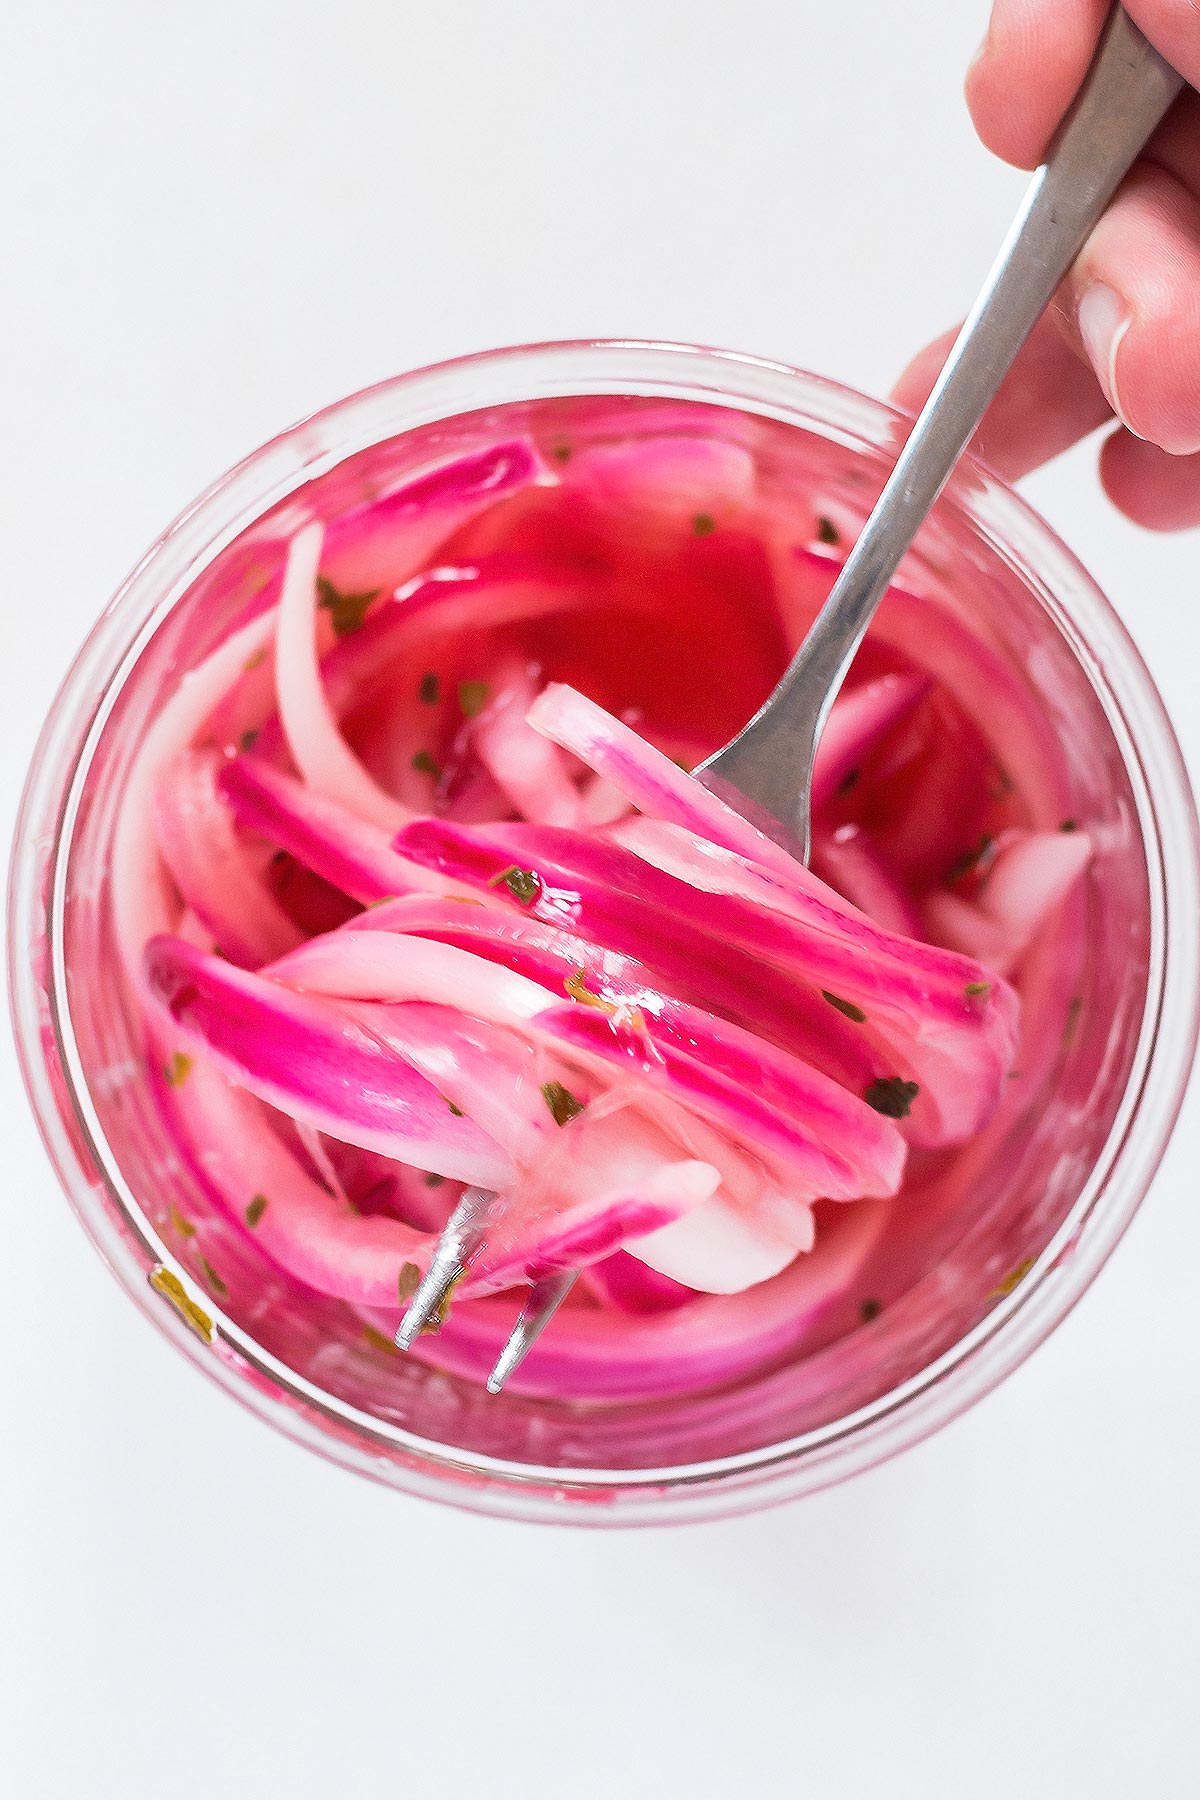 Forkful of Easy Pickled Onions